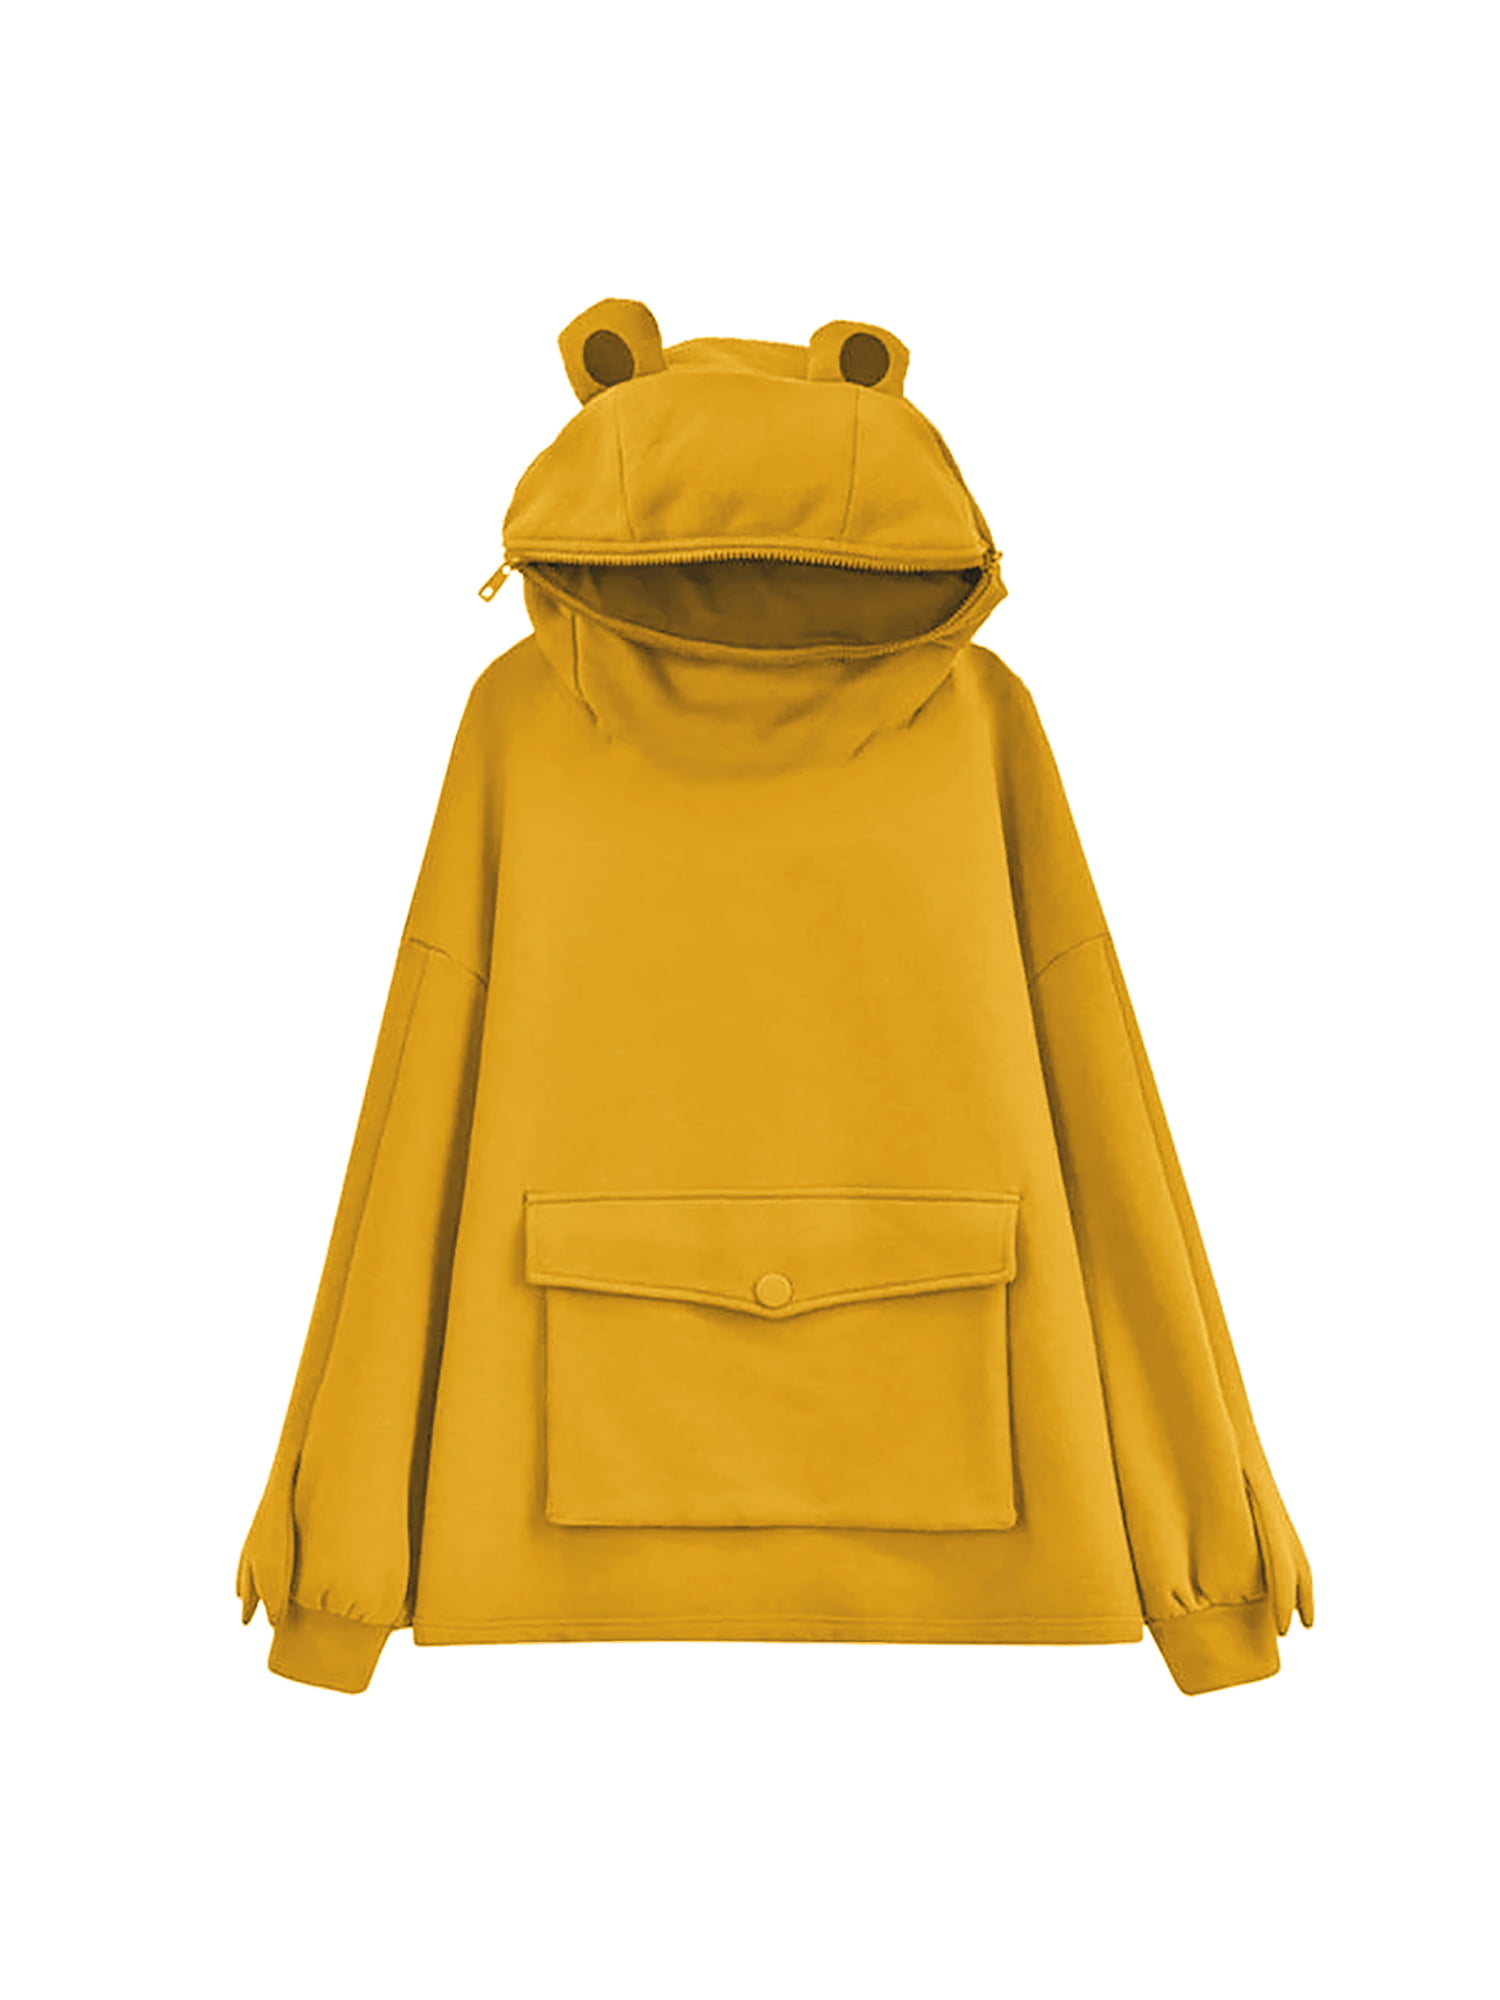 Women's/Girl's Cute Frog Hoodie Pullover Mouth Hooded Sweatshirt with Large Front Pocket ORT Womens Shirts 